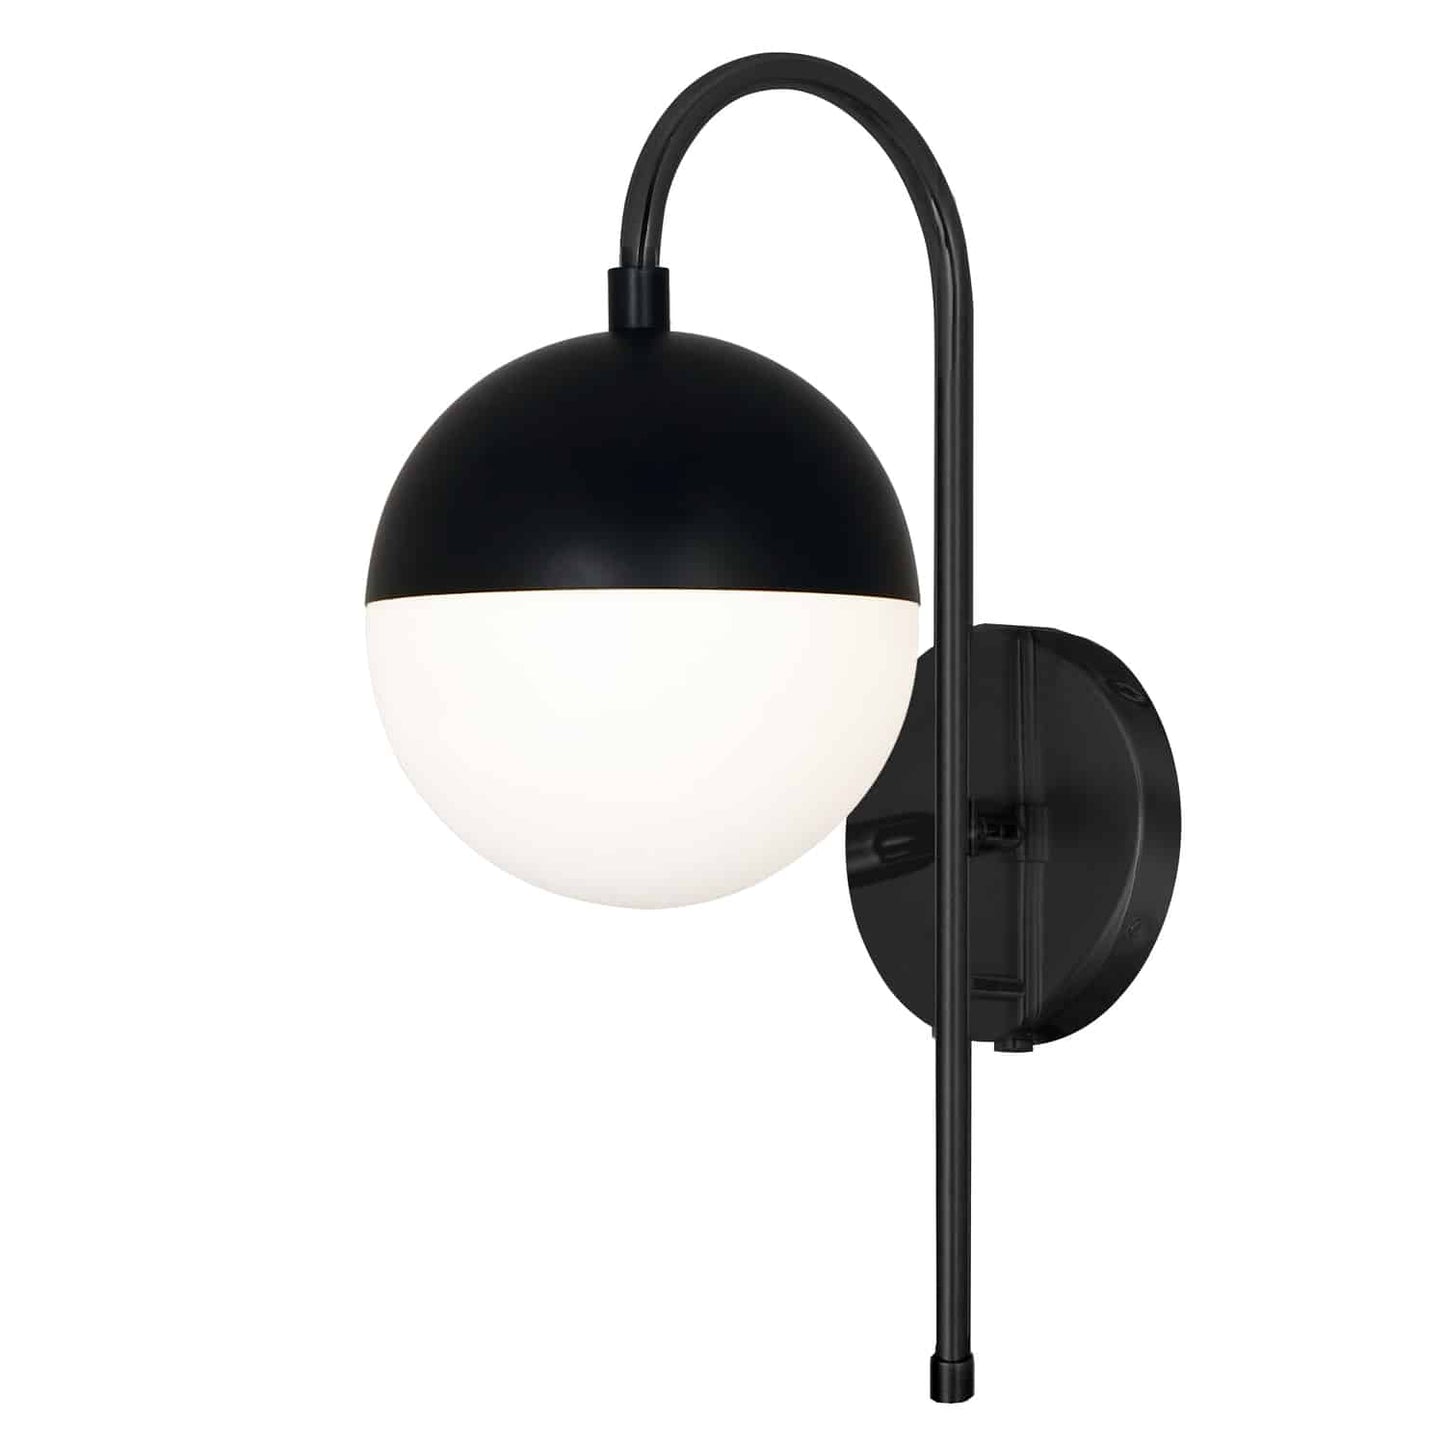 Dainolite DAY-71W-MB 1 Light Halogen Wall Sconce, Matte Black with White Glass, Hardwire or Plug-In